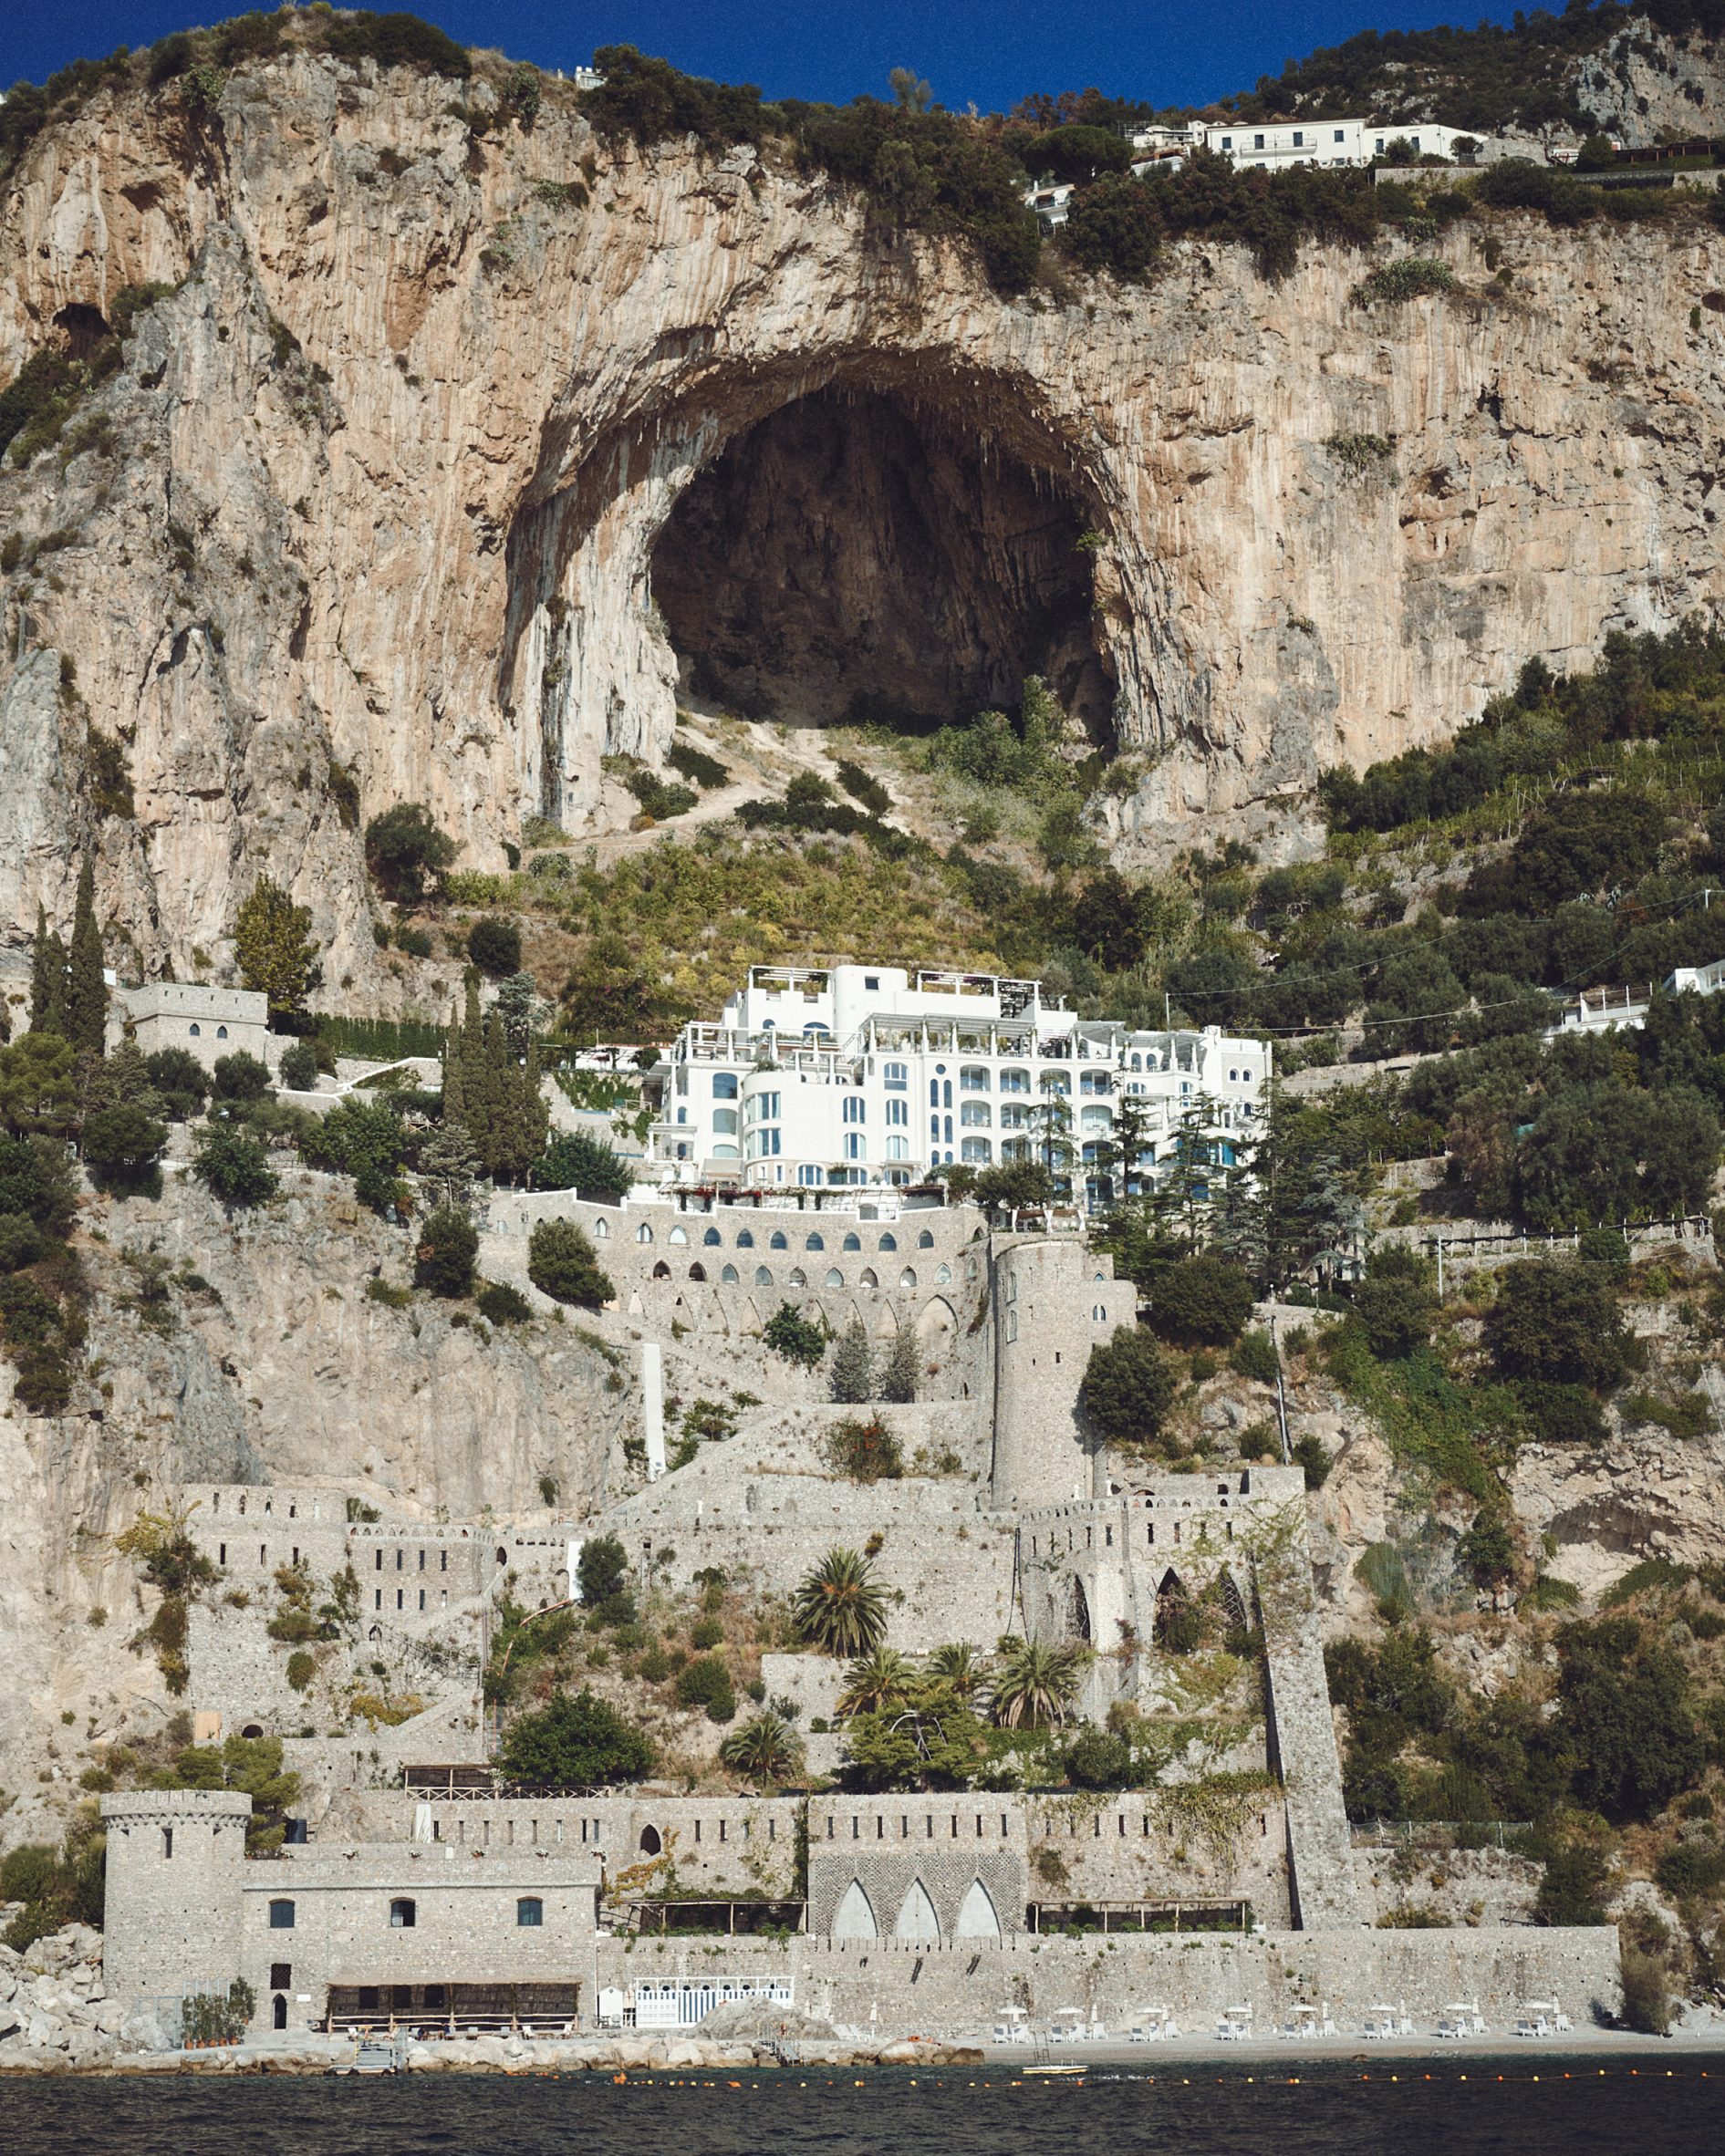 White hotel sat below a large cave and above medieval fortifications